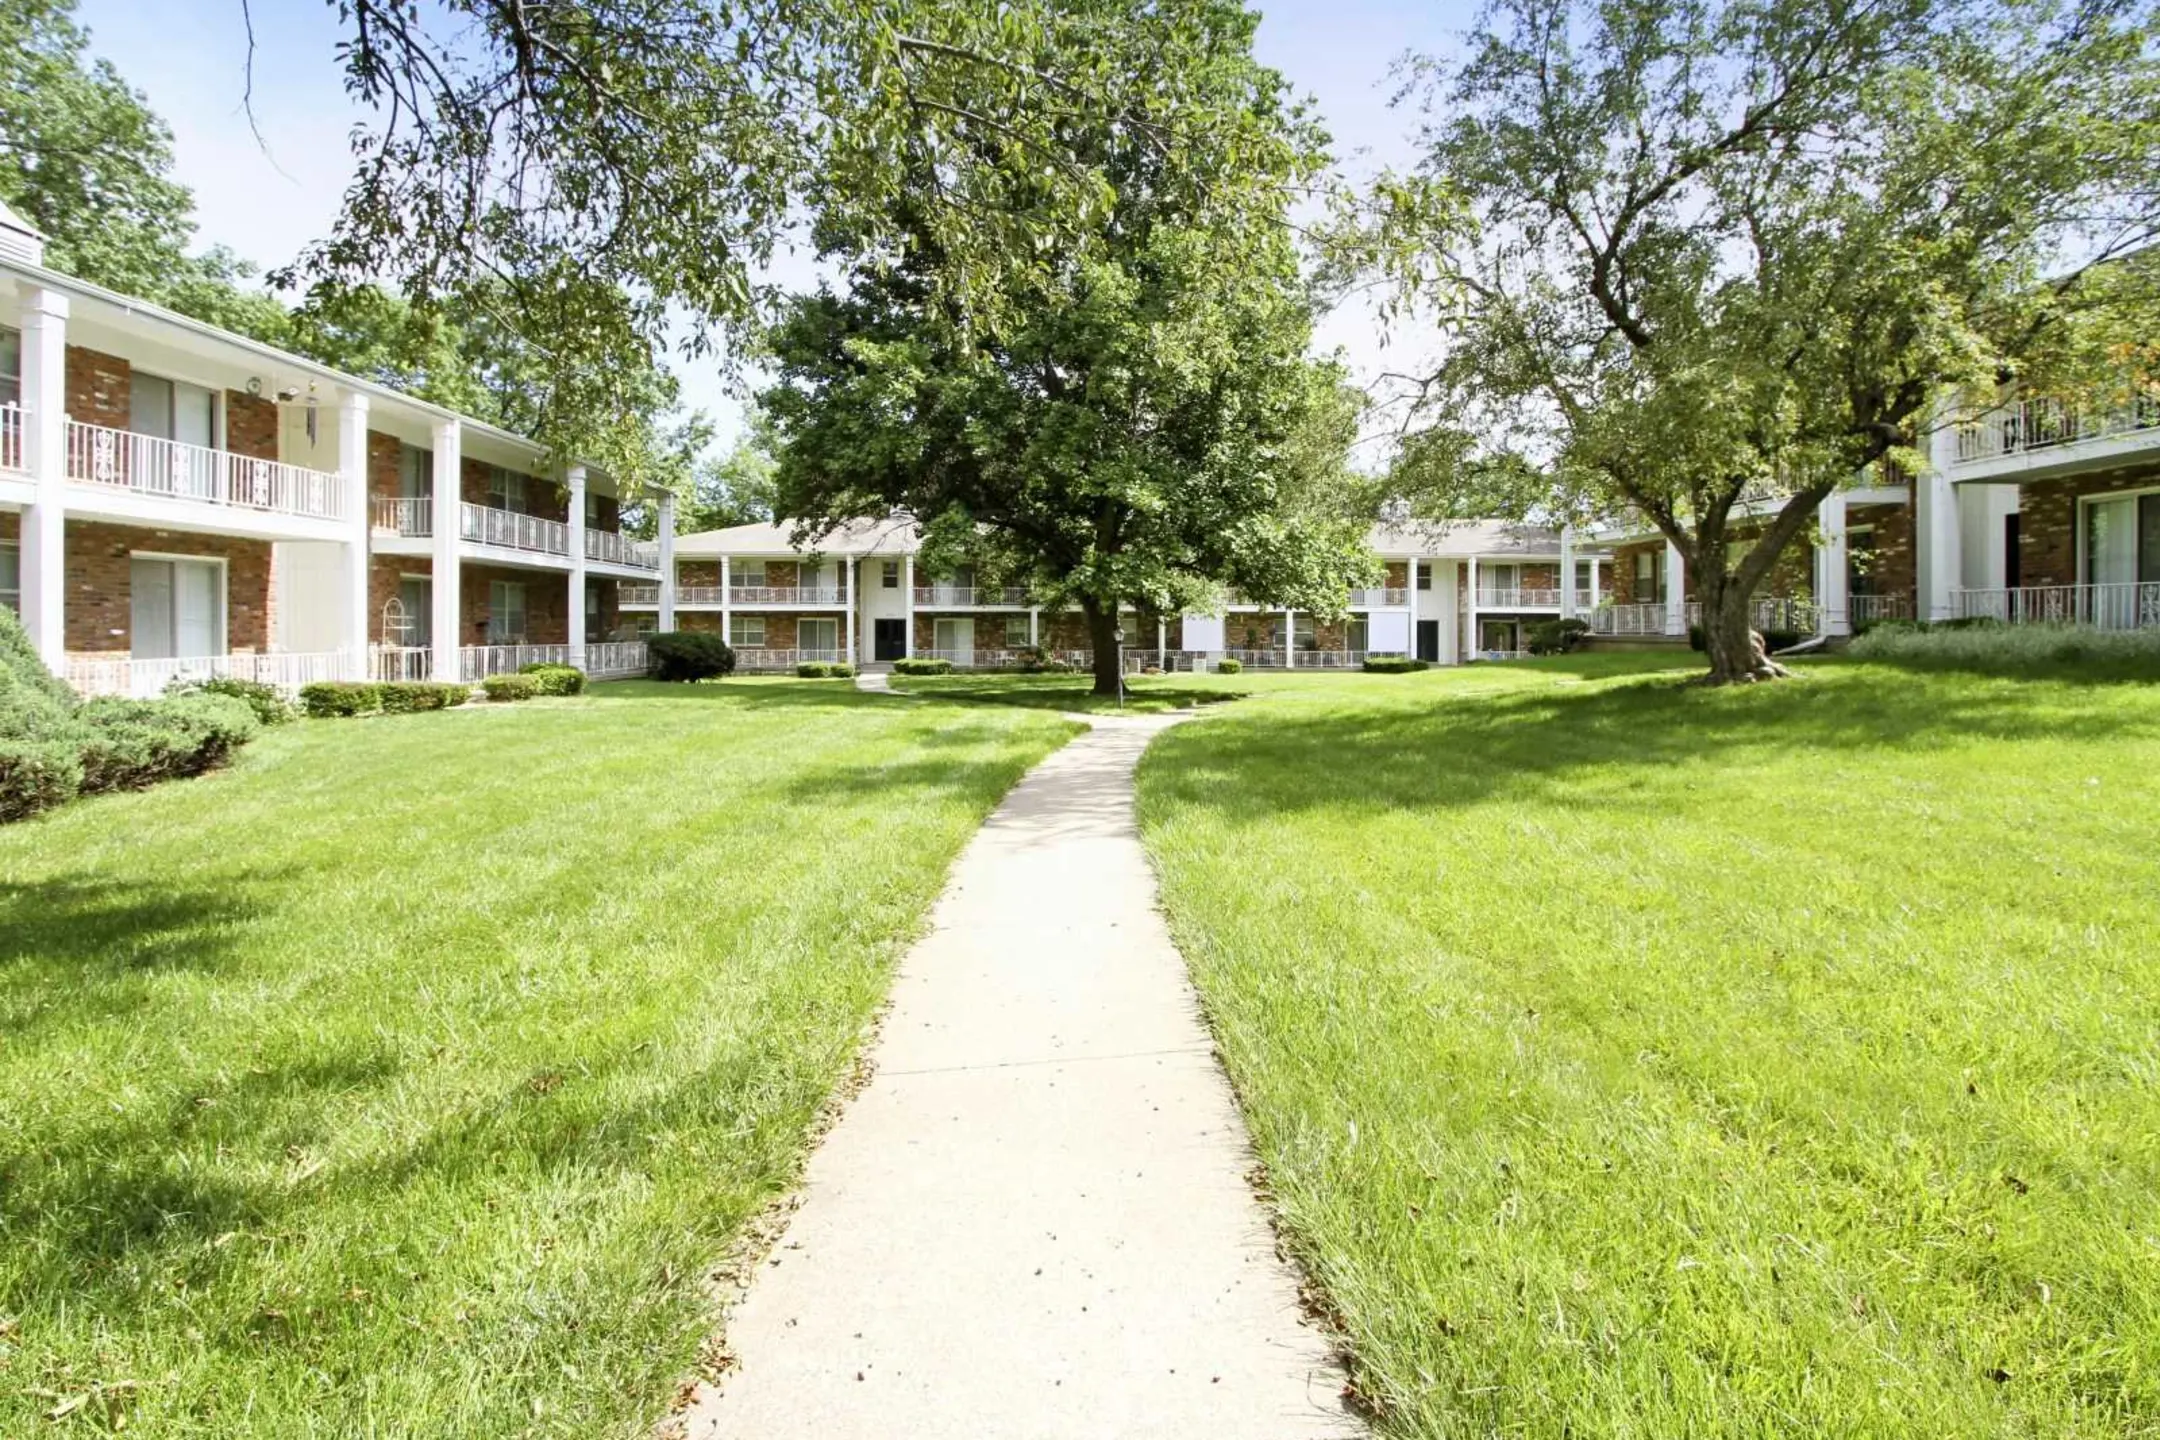 Building - Colonial Gardens & Cherbourg Apartments - Overland Park, KS